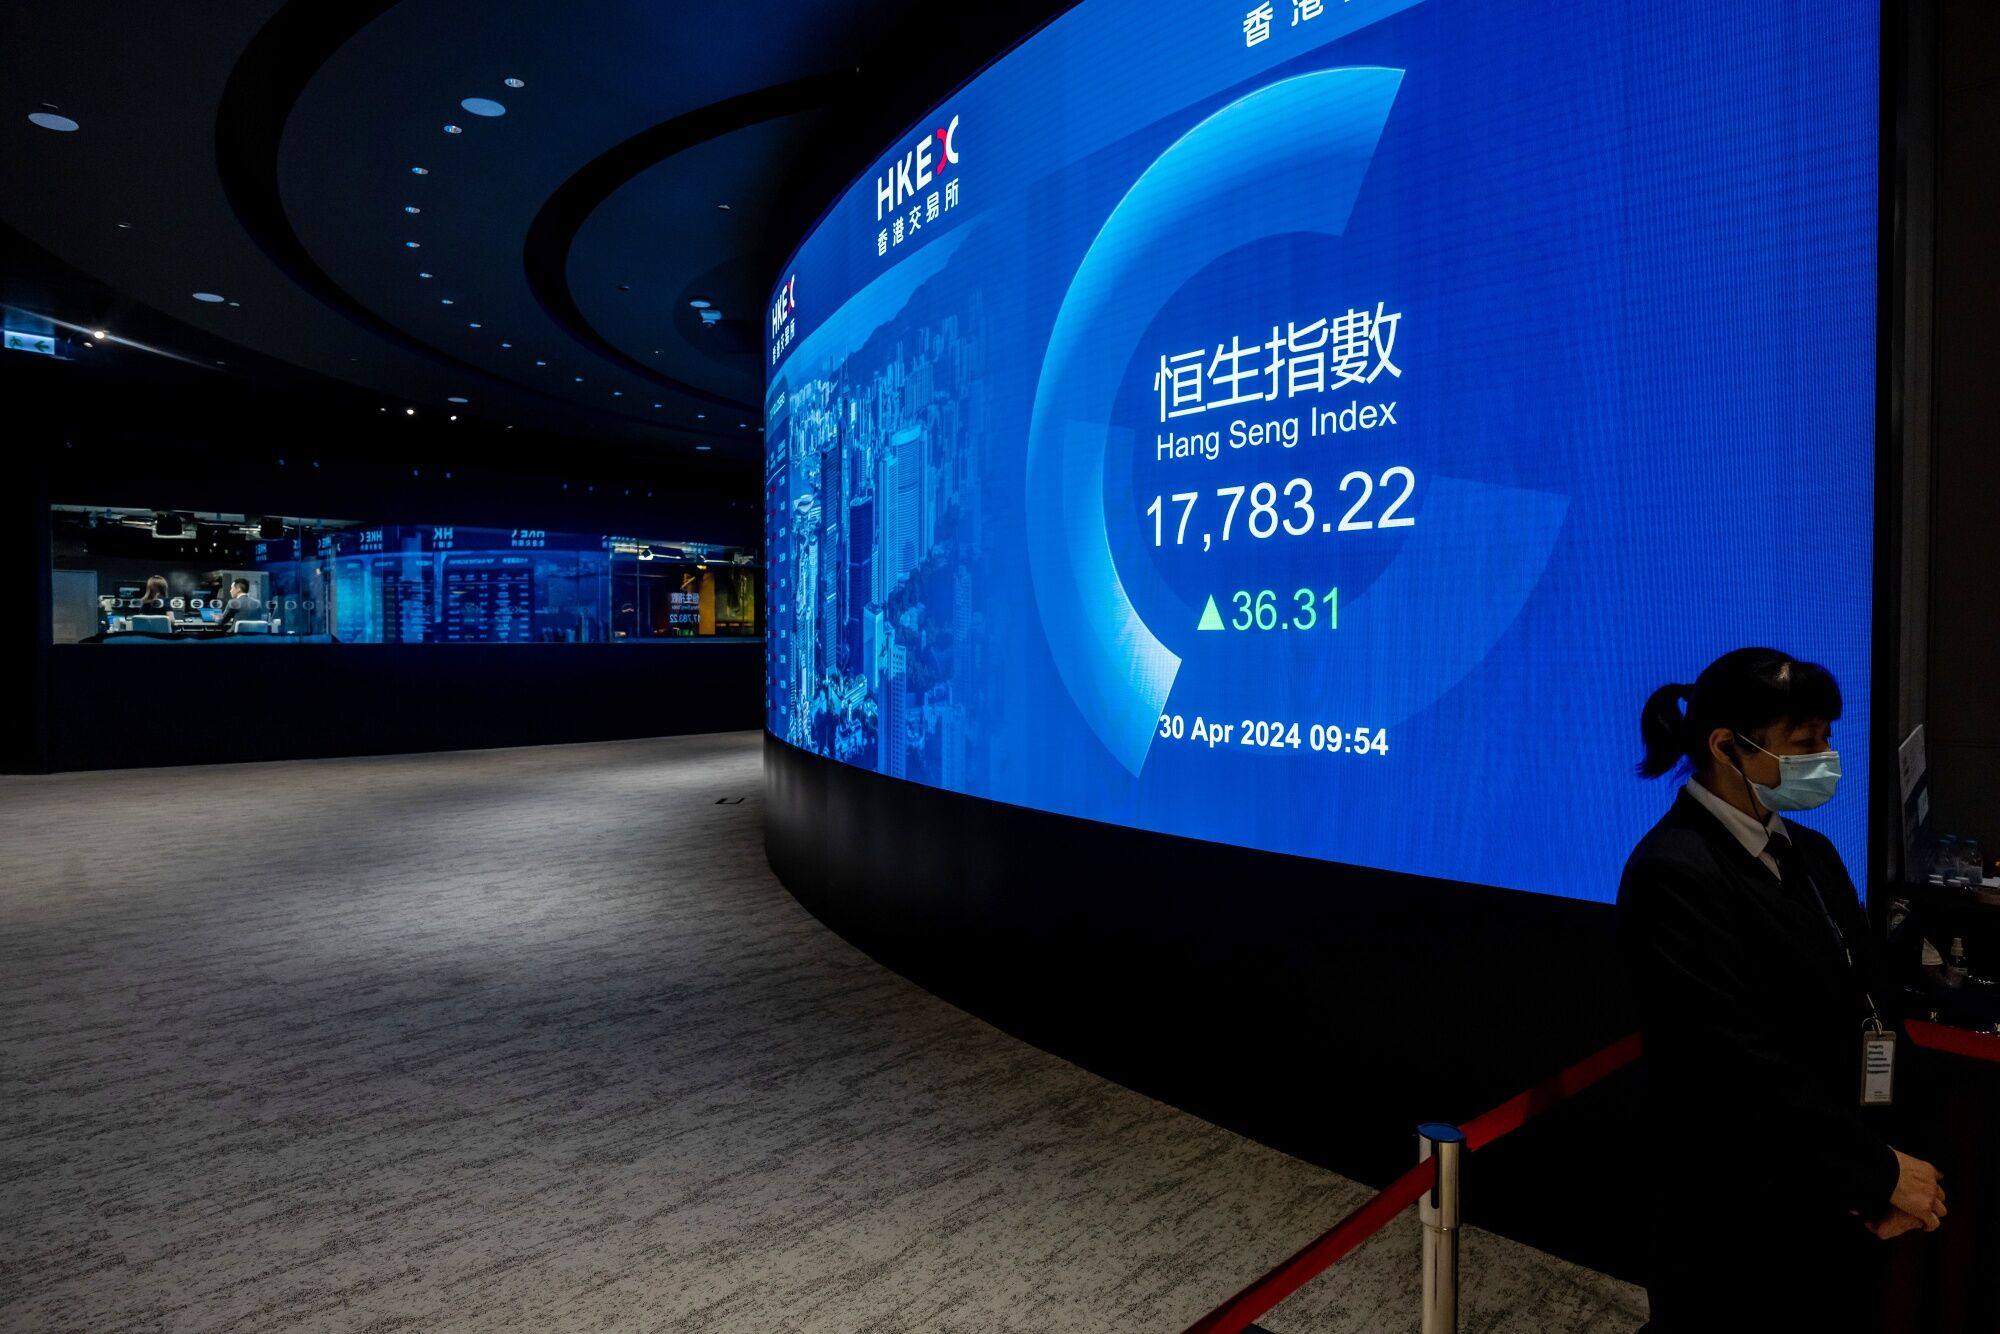 The figures for the Hang Seng Index on a screen at the Hong Kong Stock Exchange in Hong Kong, China, on Tuesday, April 30, 2024. photo Bloomberg